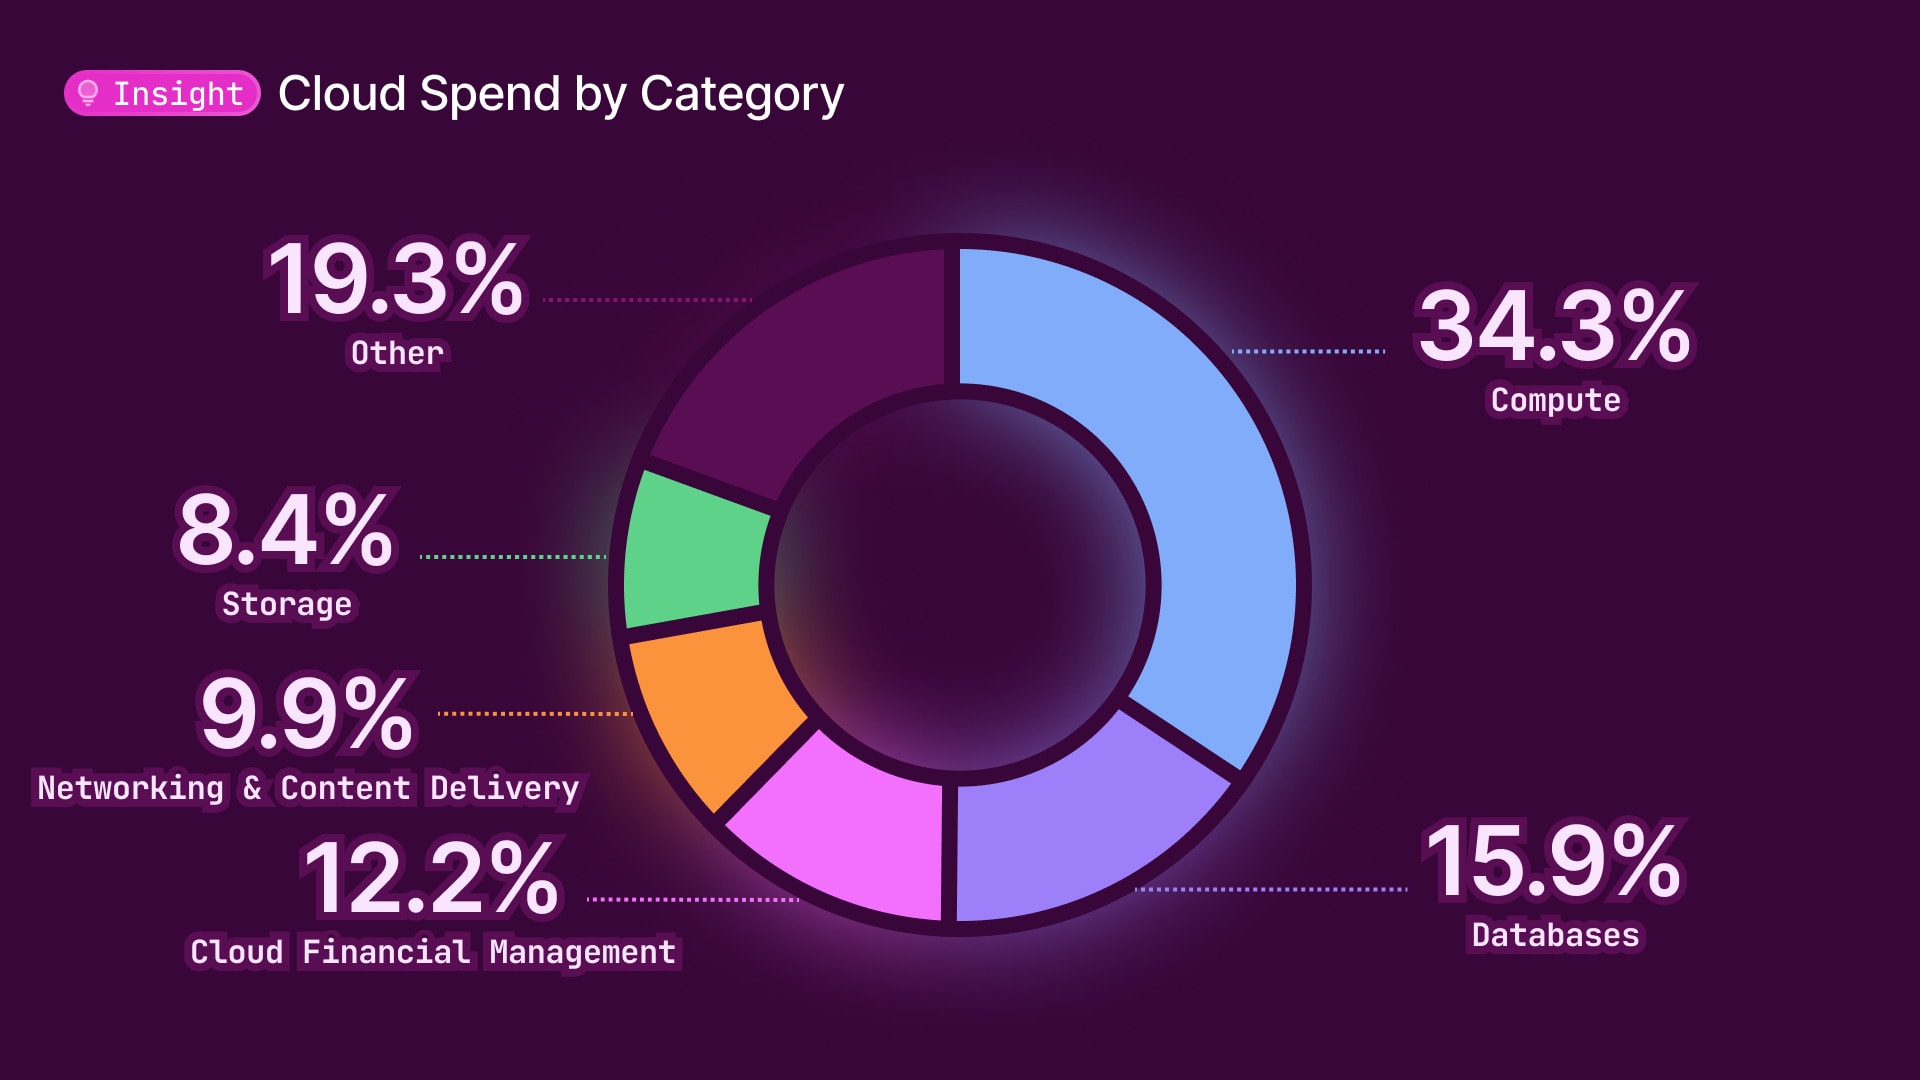 Share of Cloud Spend